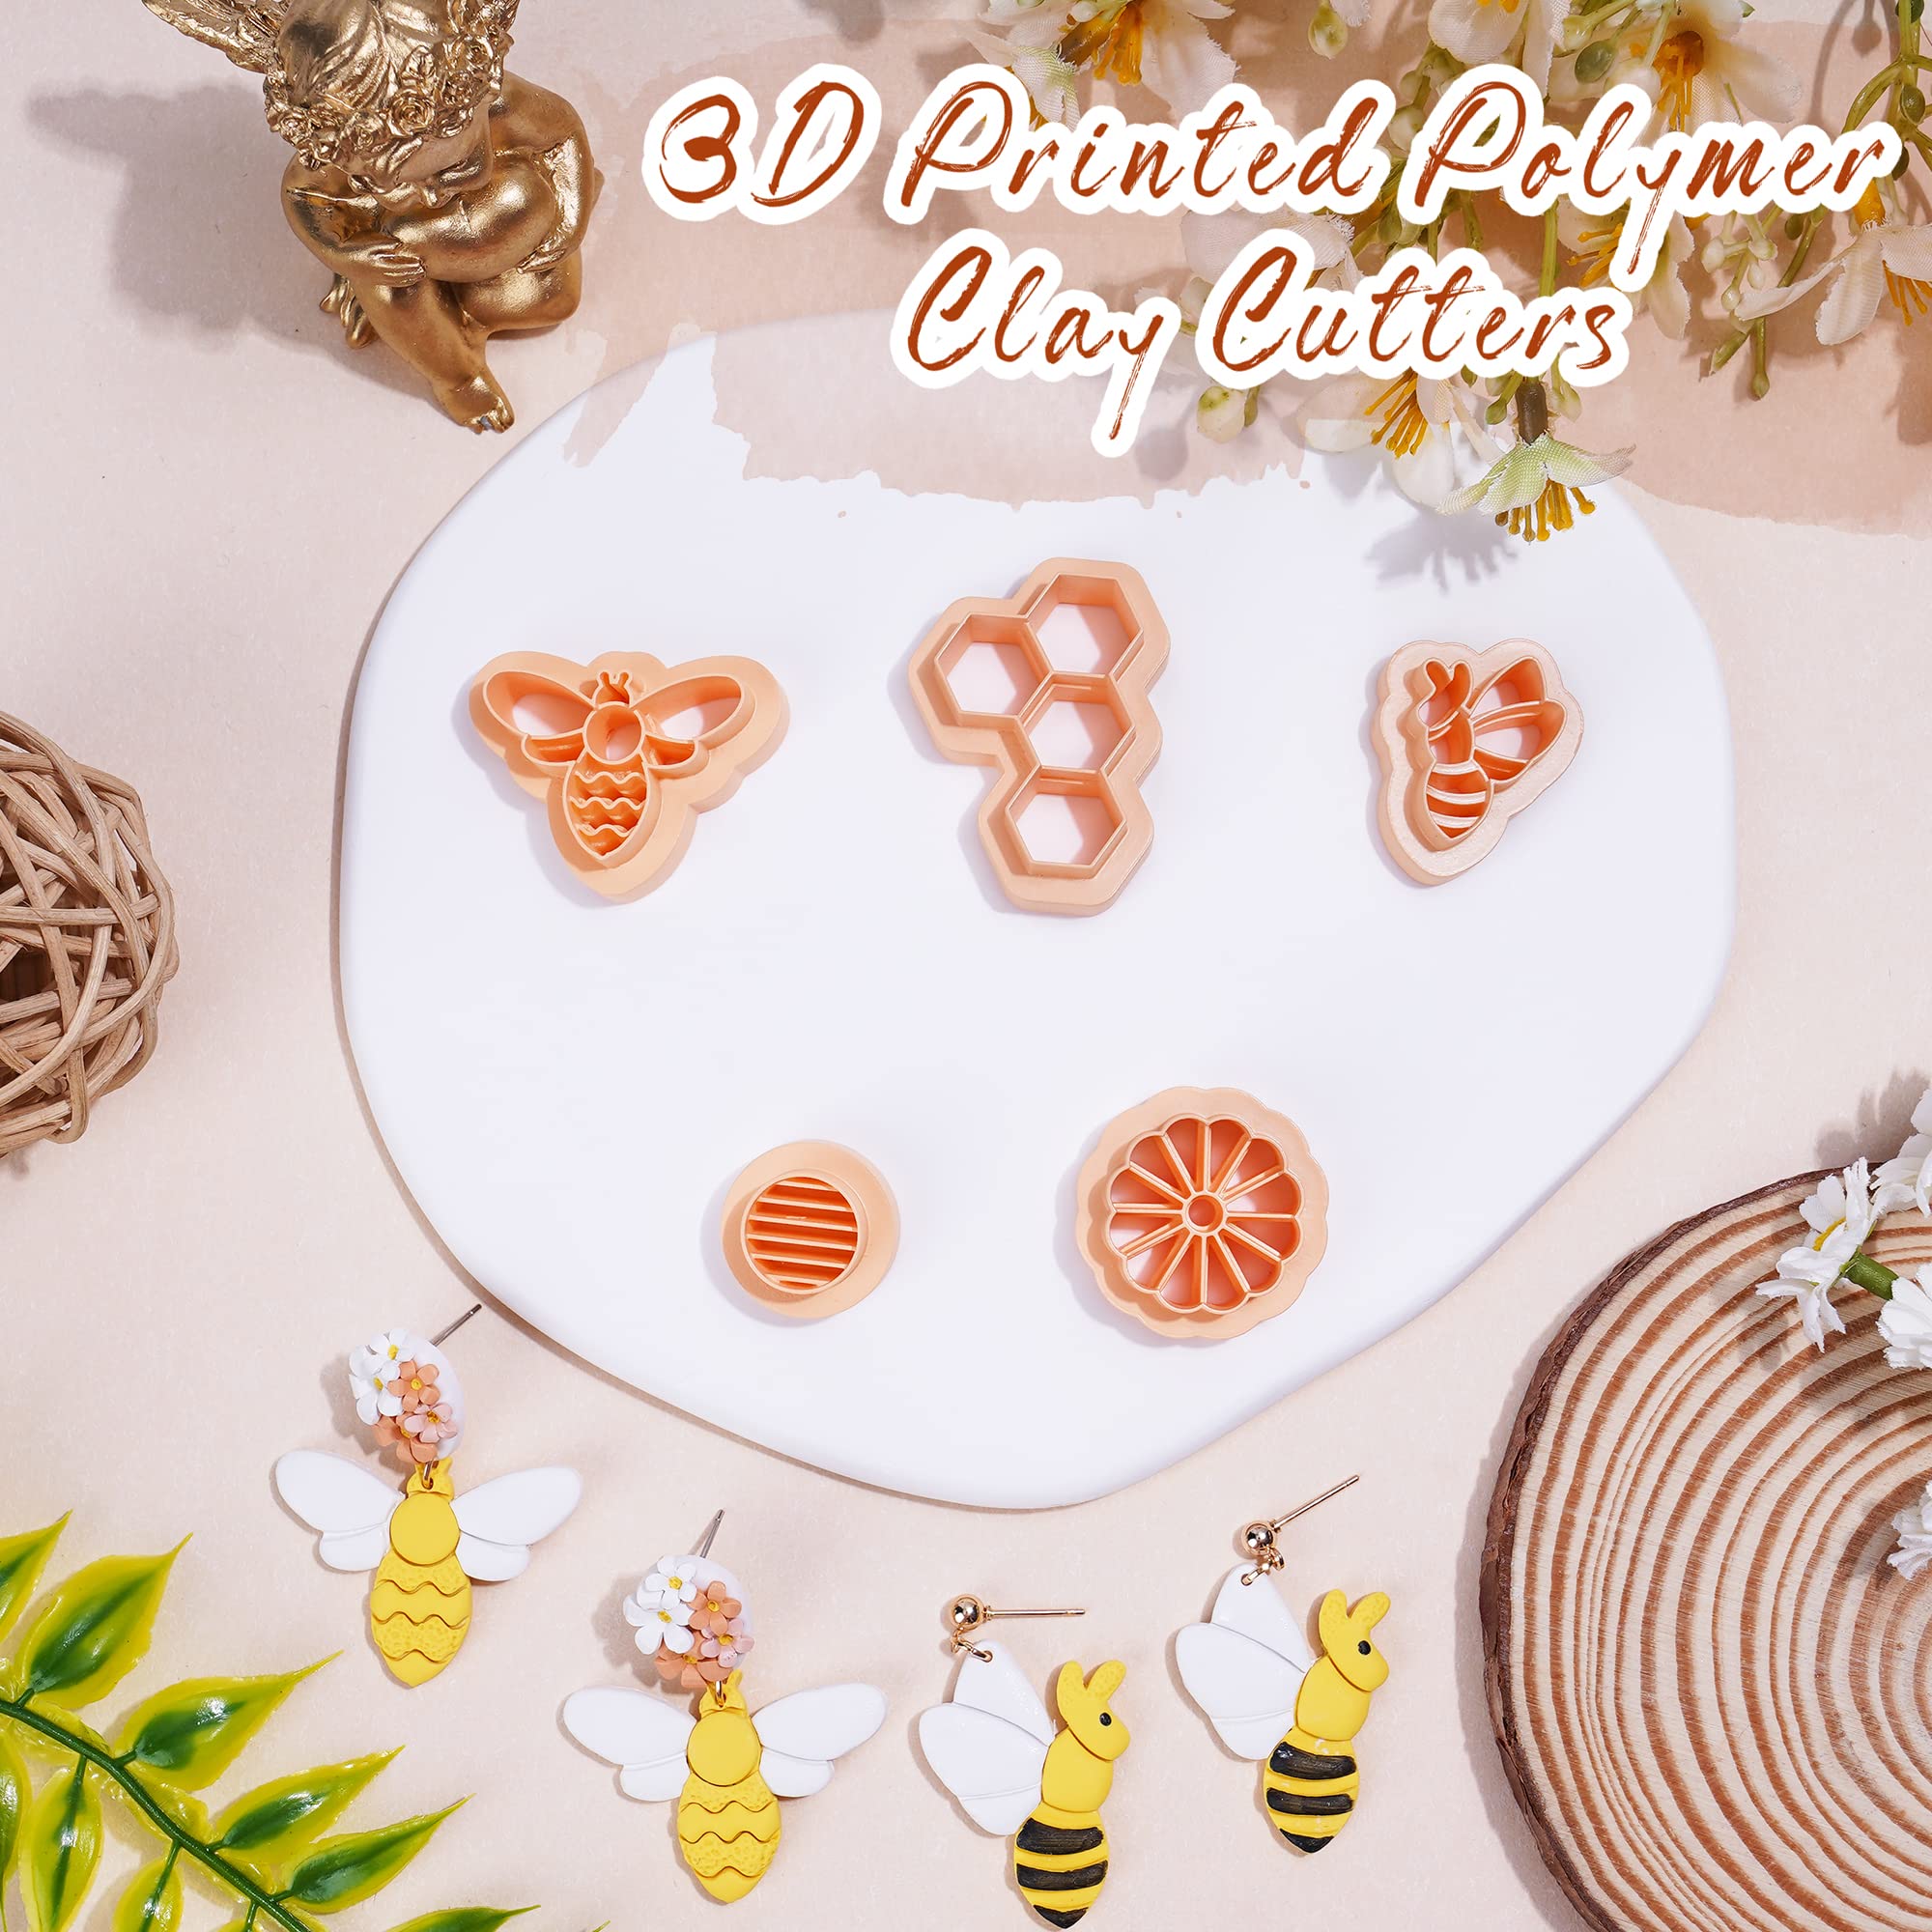 Puocaon Honey Bee Clay Cutters 5 Shapes